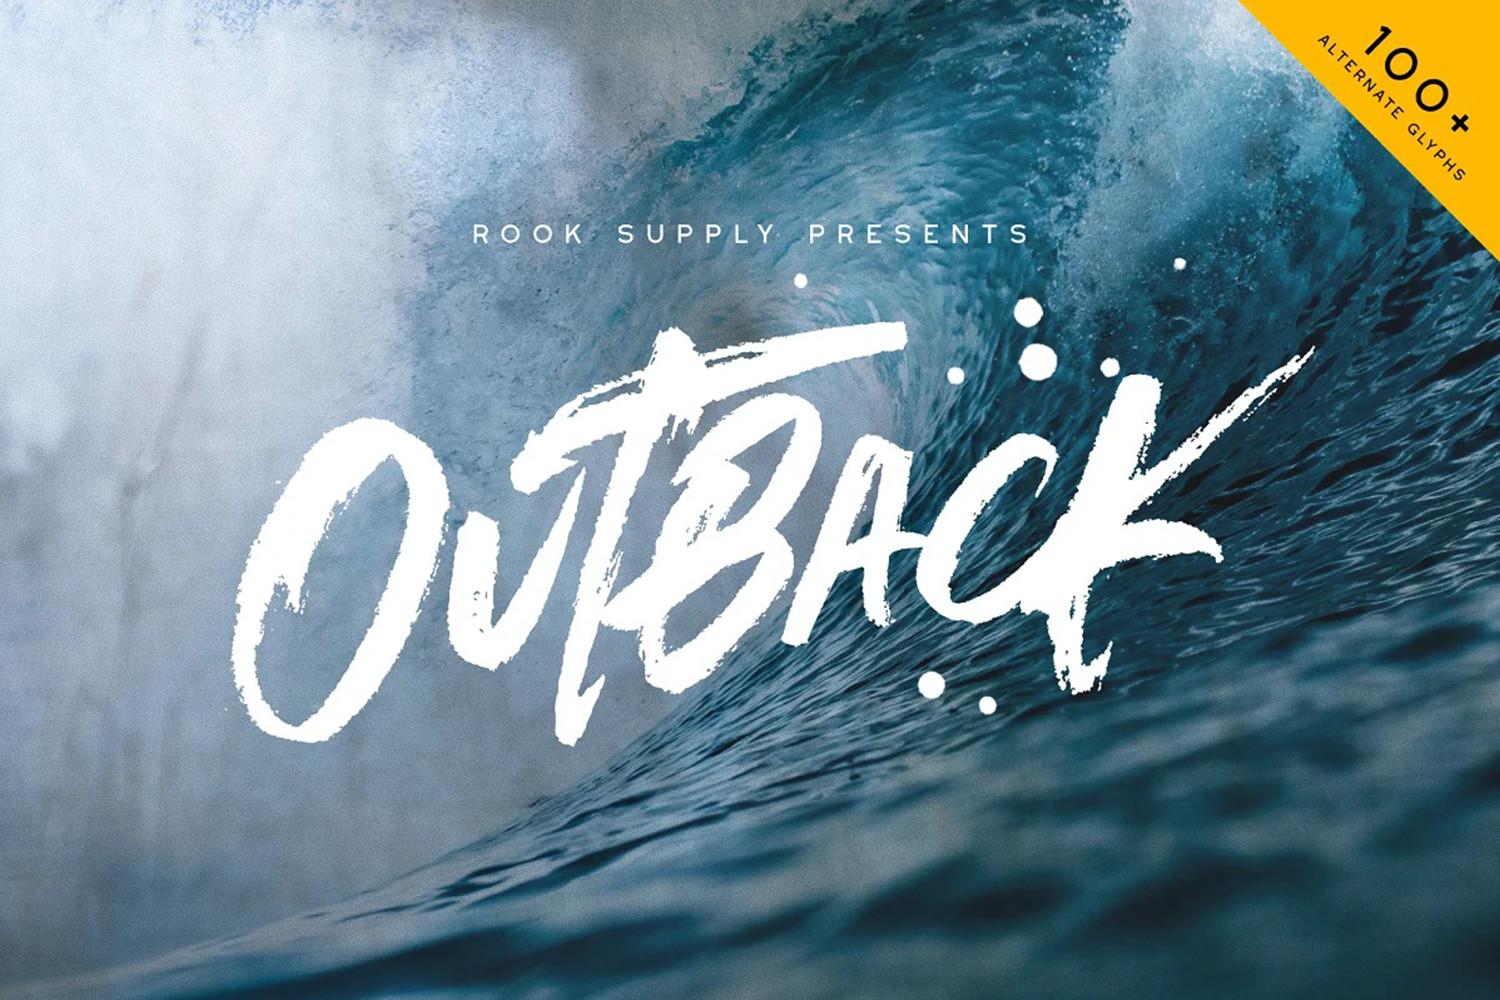 Outback Font